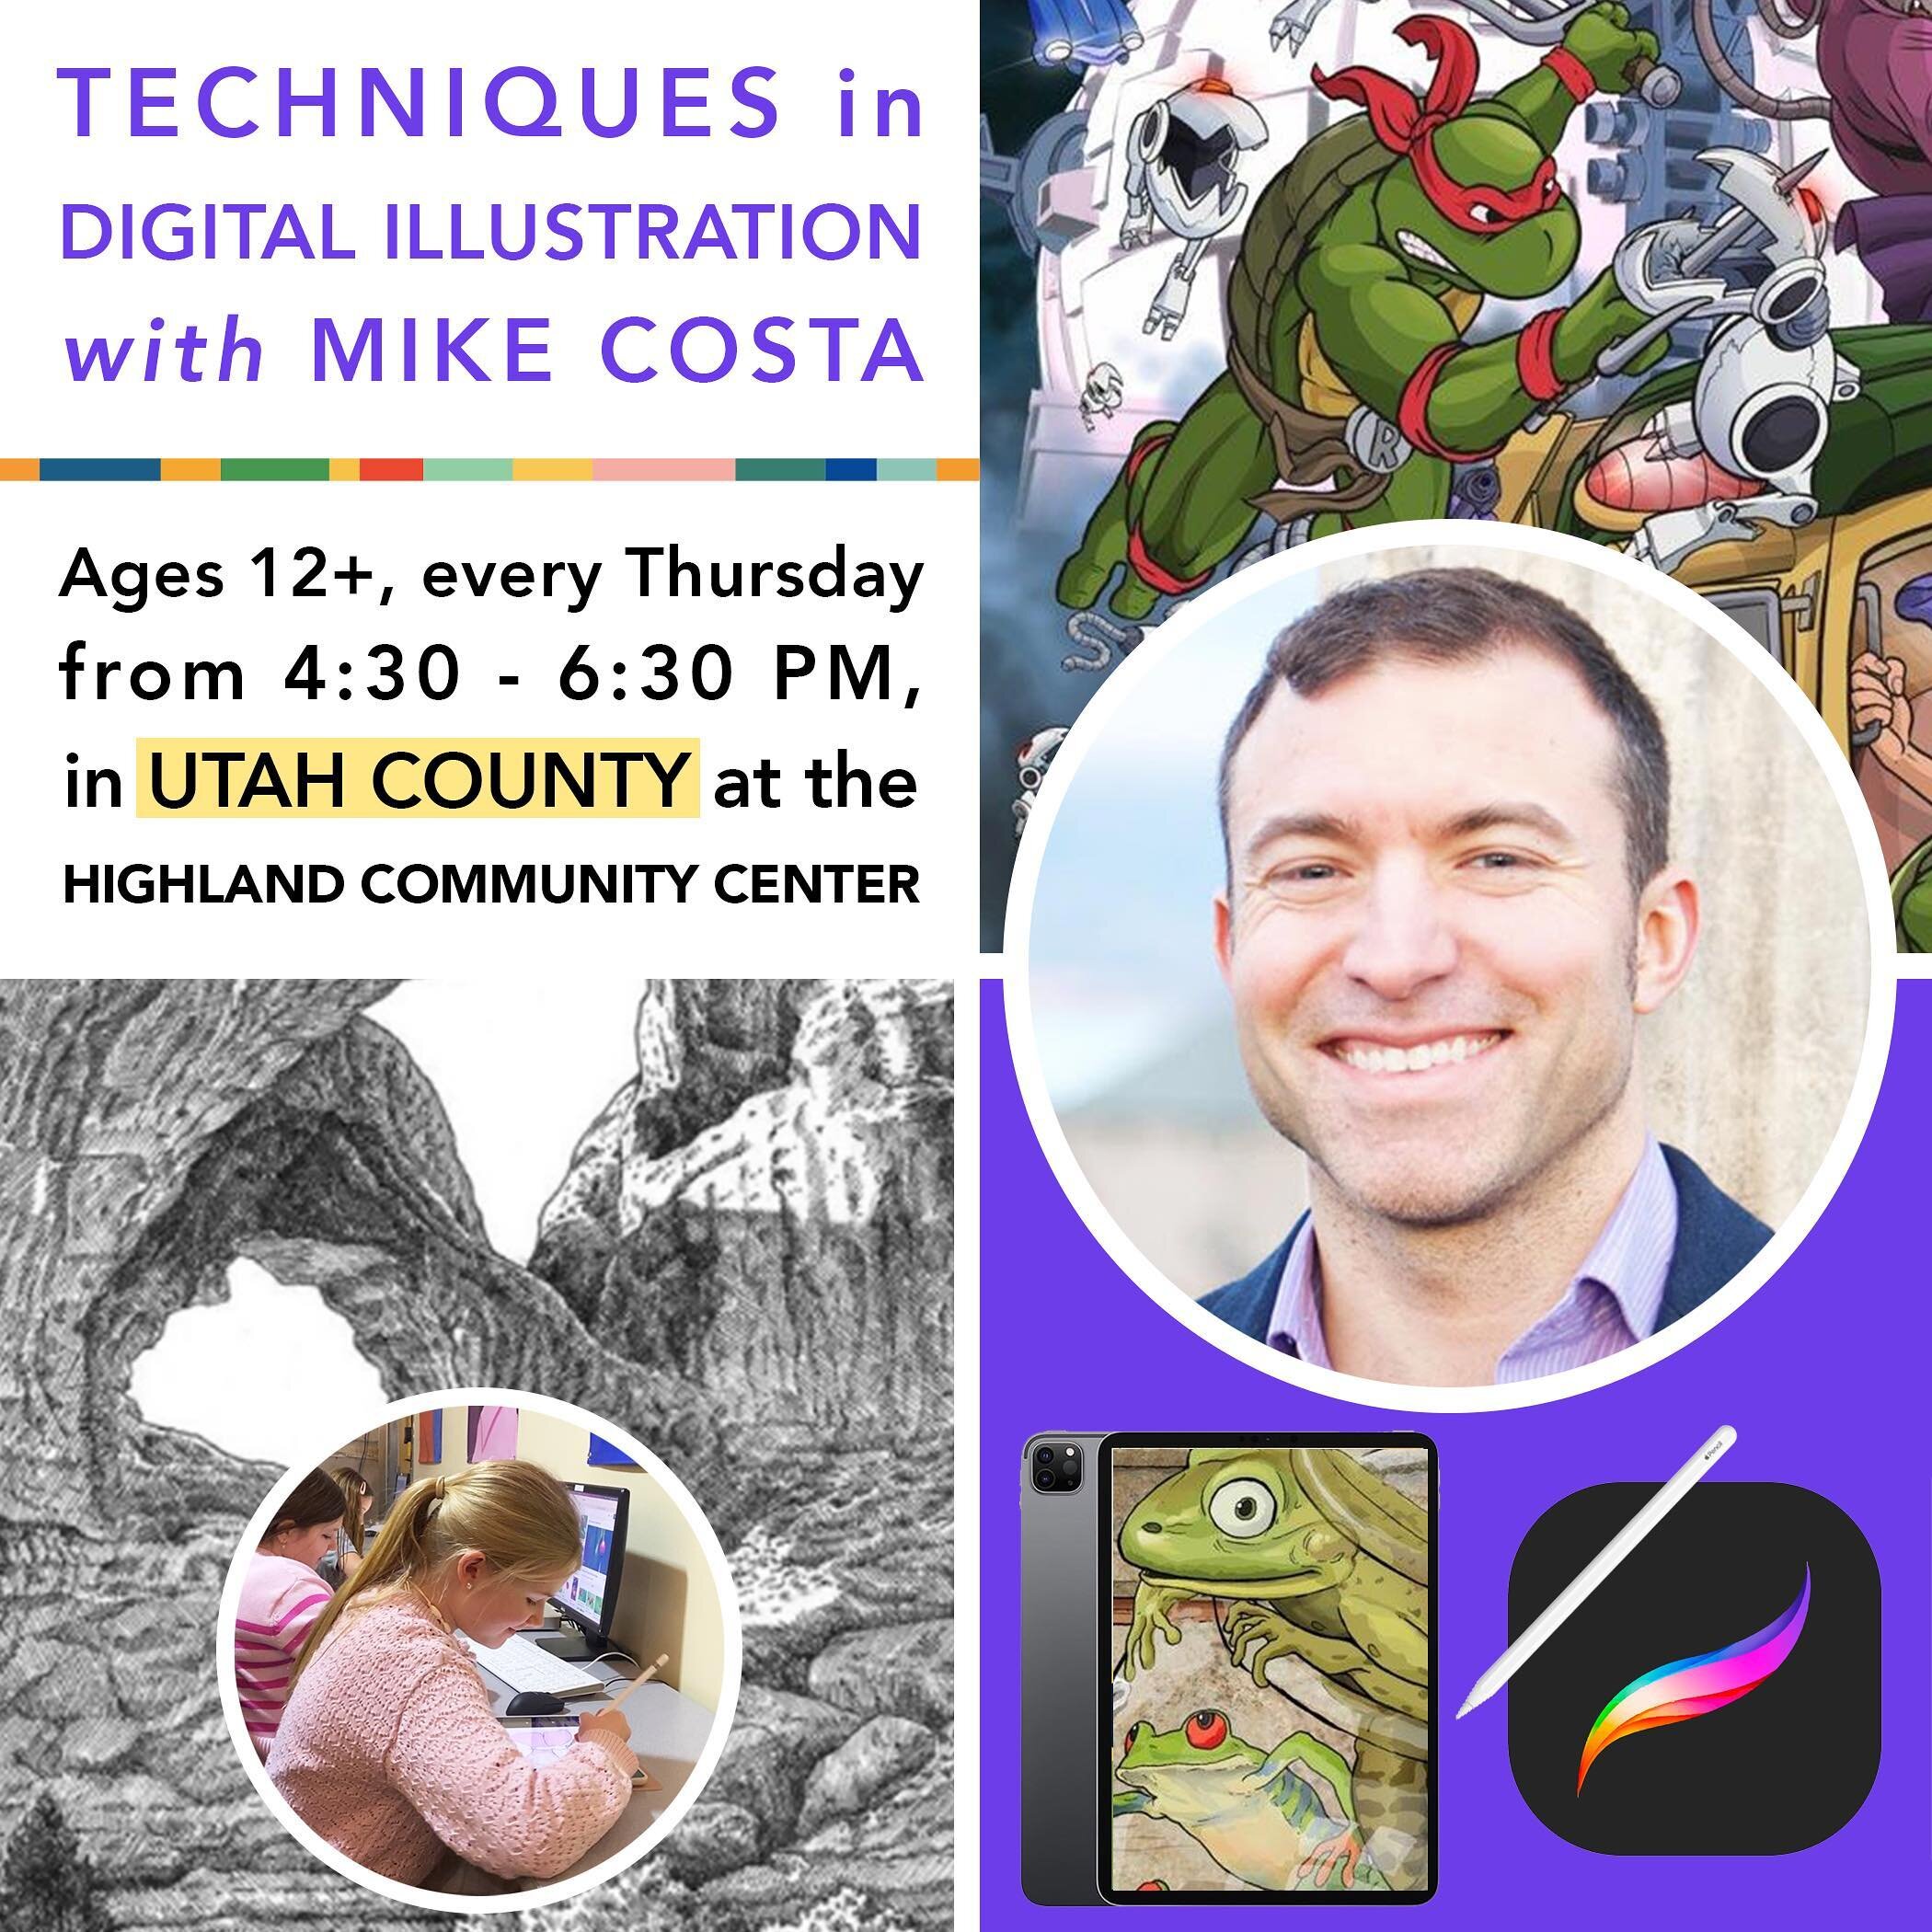 Join us on Thursday afternoons at the Highland Community Center for &ldquo;Techniques in Digital Illustration&rdquo; with @mikecosta ! 🤩👏 

In this class, students will explore concepts and practices of digital art production using Procreate on the